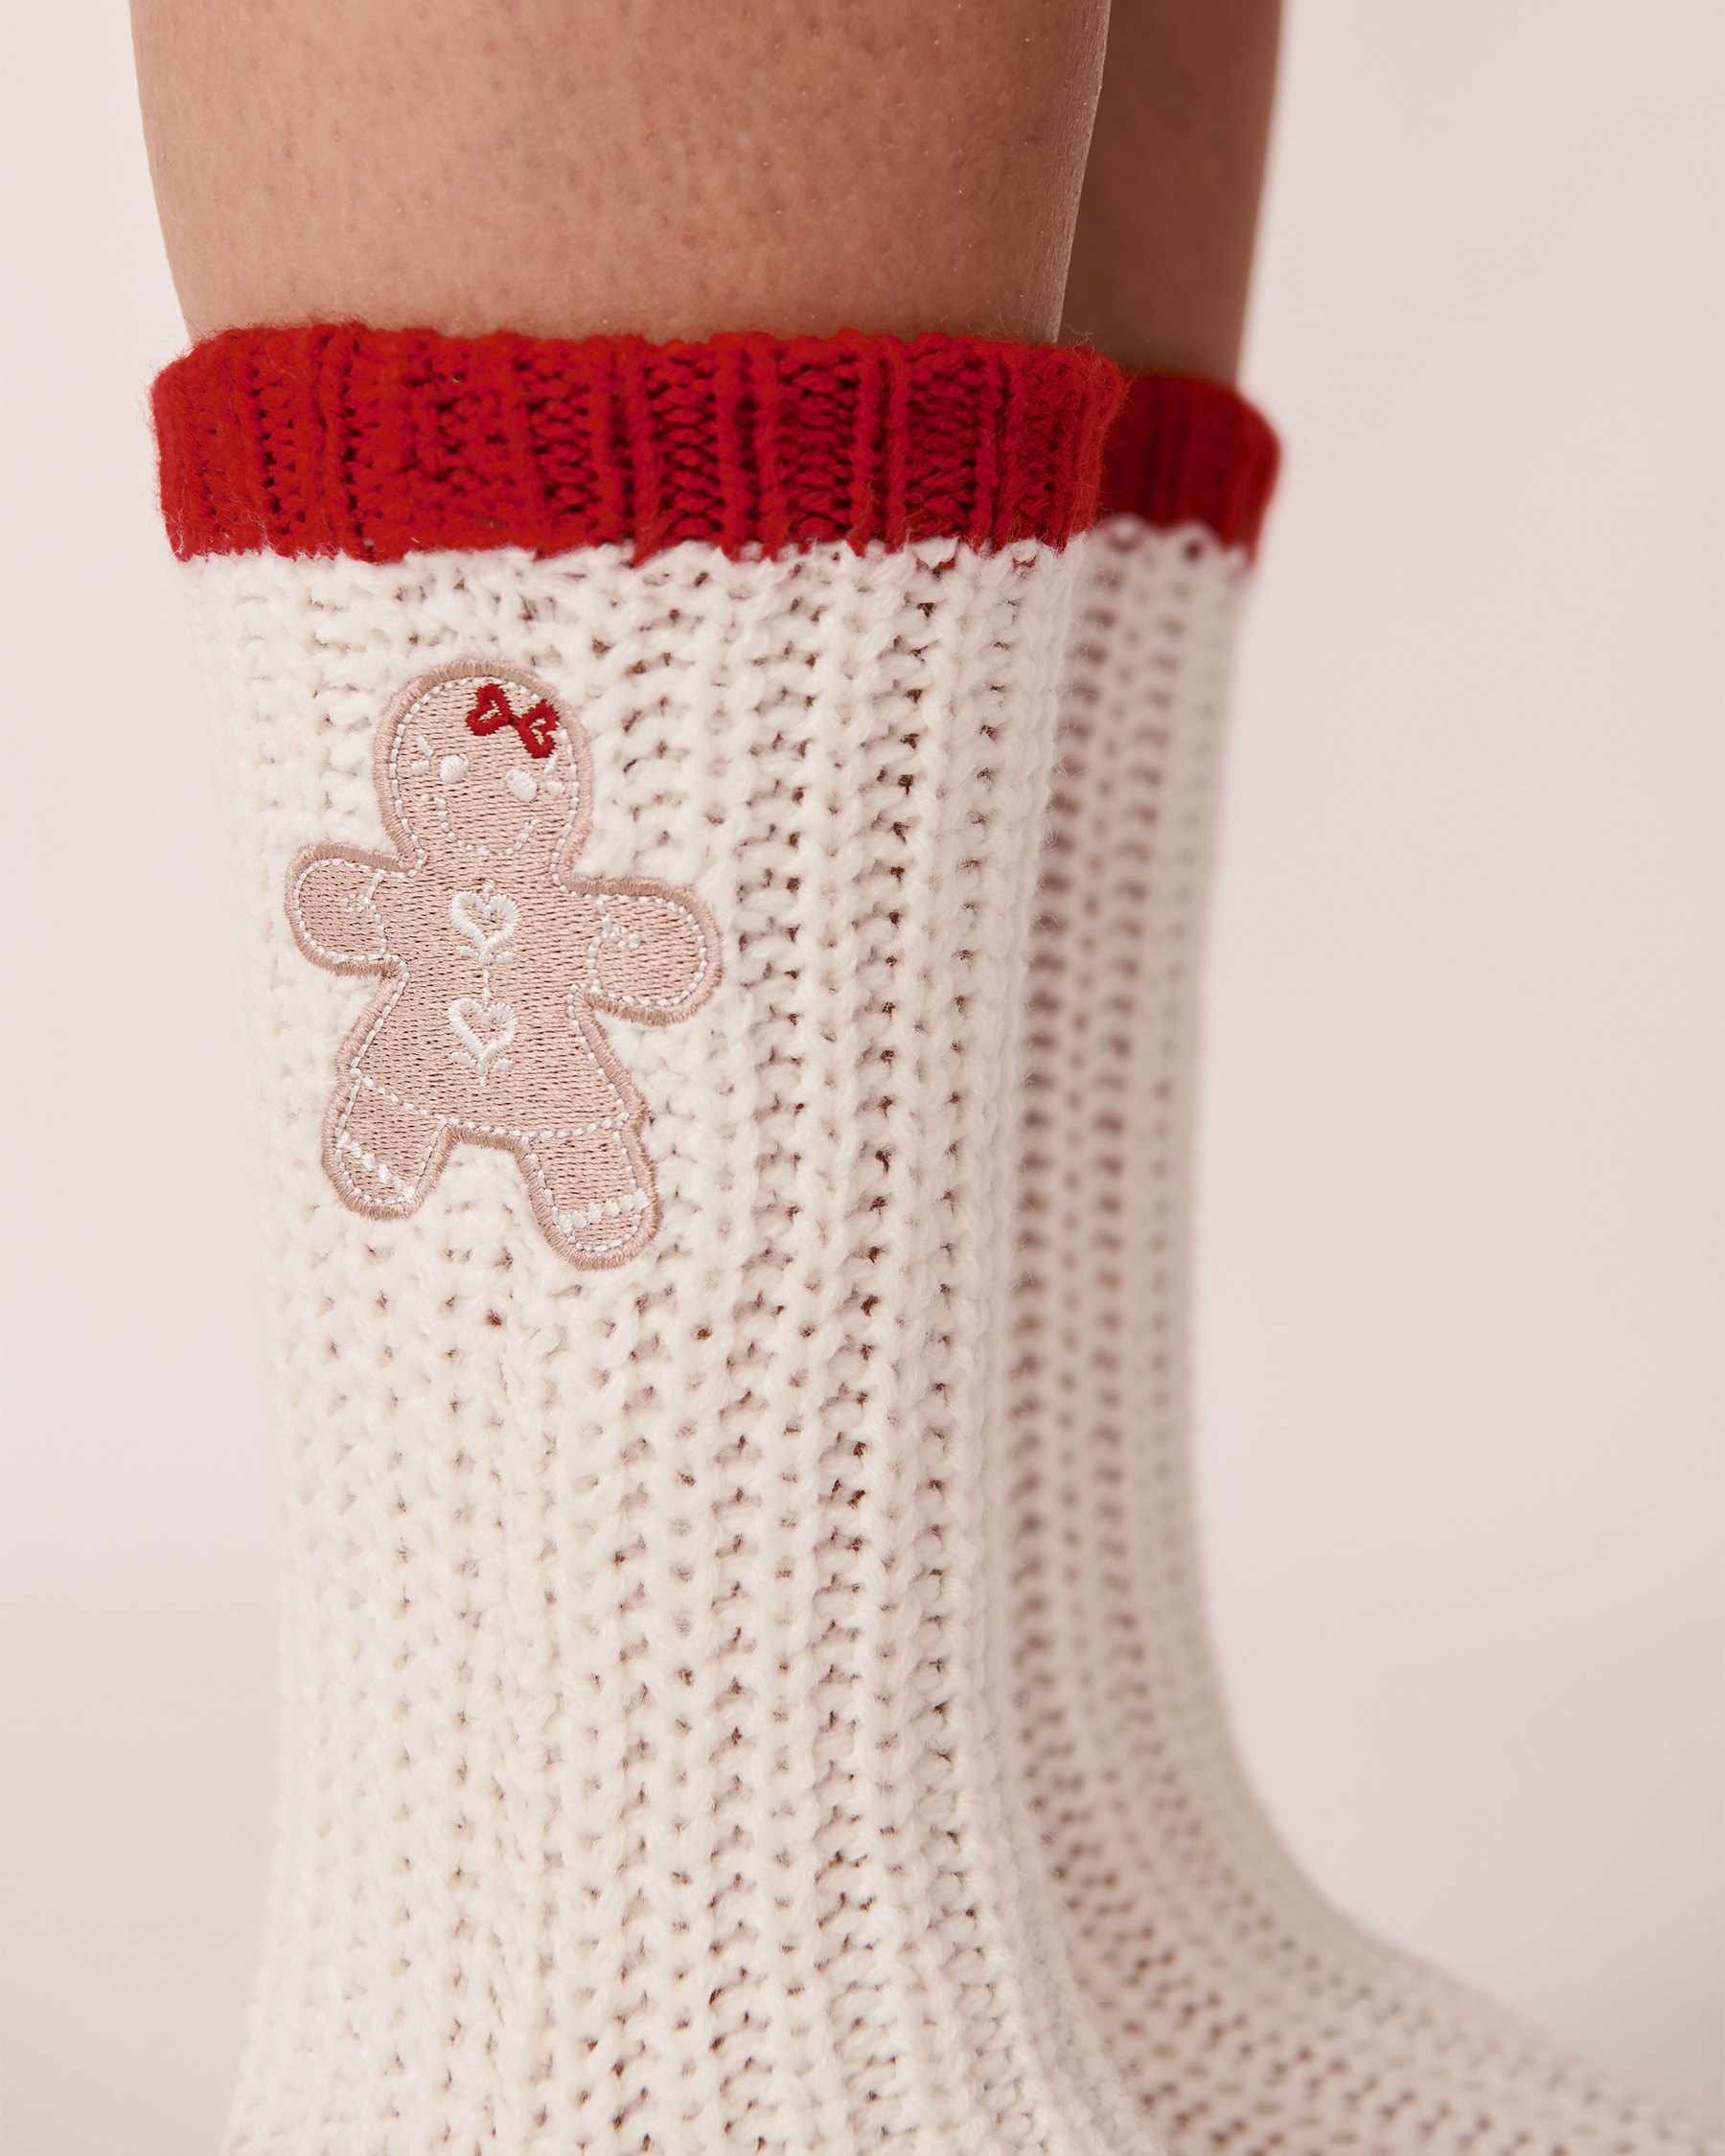 LA VIE EN ROSE Knitted Socks with winter Embroidery Snow white 40700245 - View3